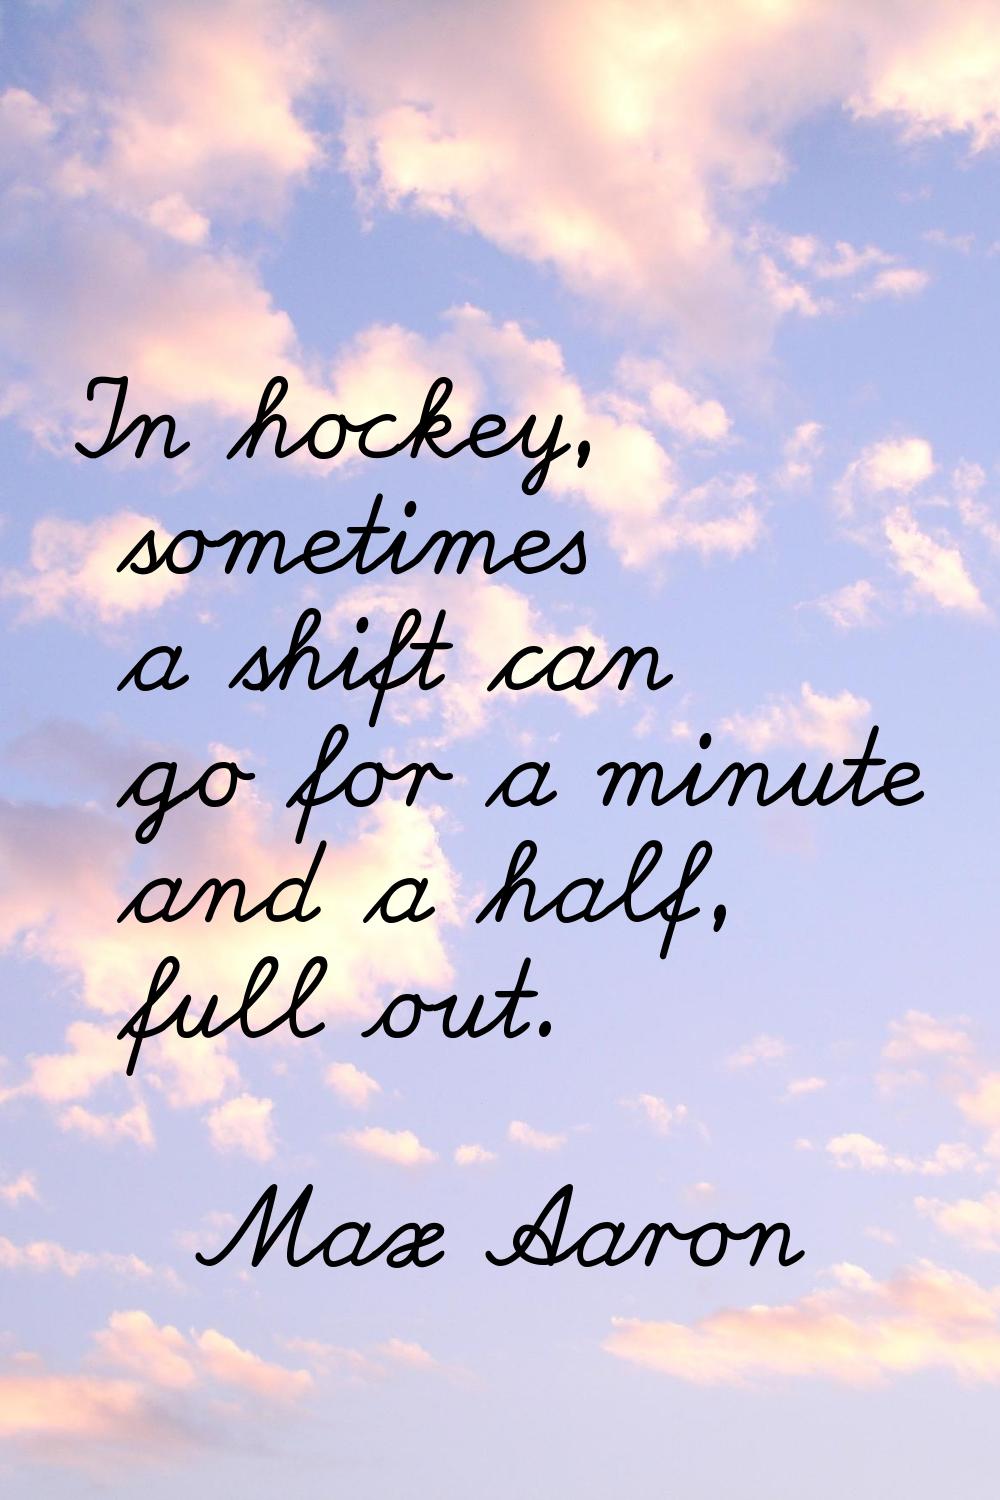 In hockey, sometimes a shift can go for a minute and a half, full out.